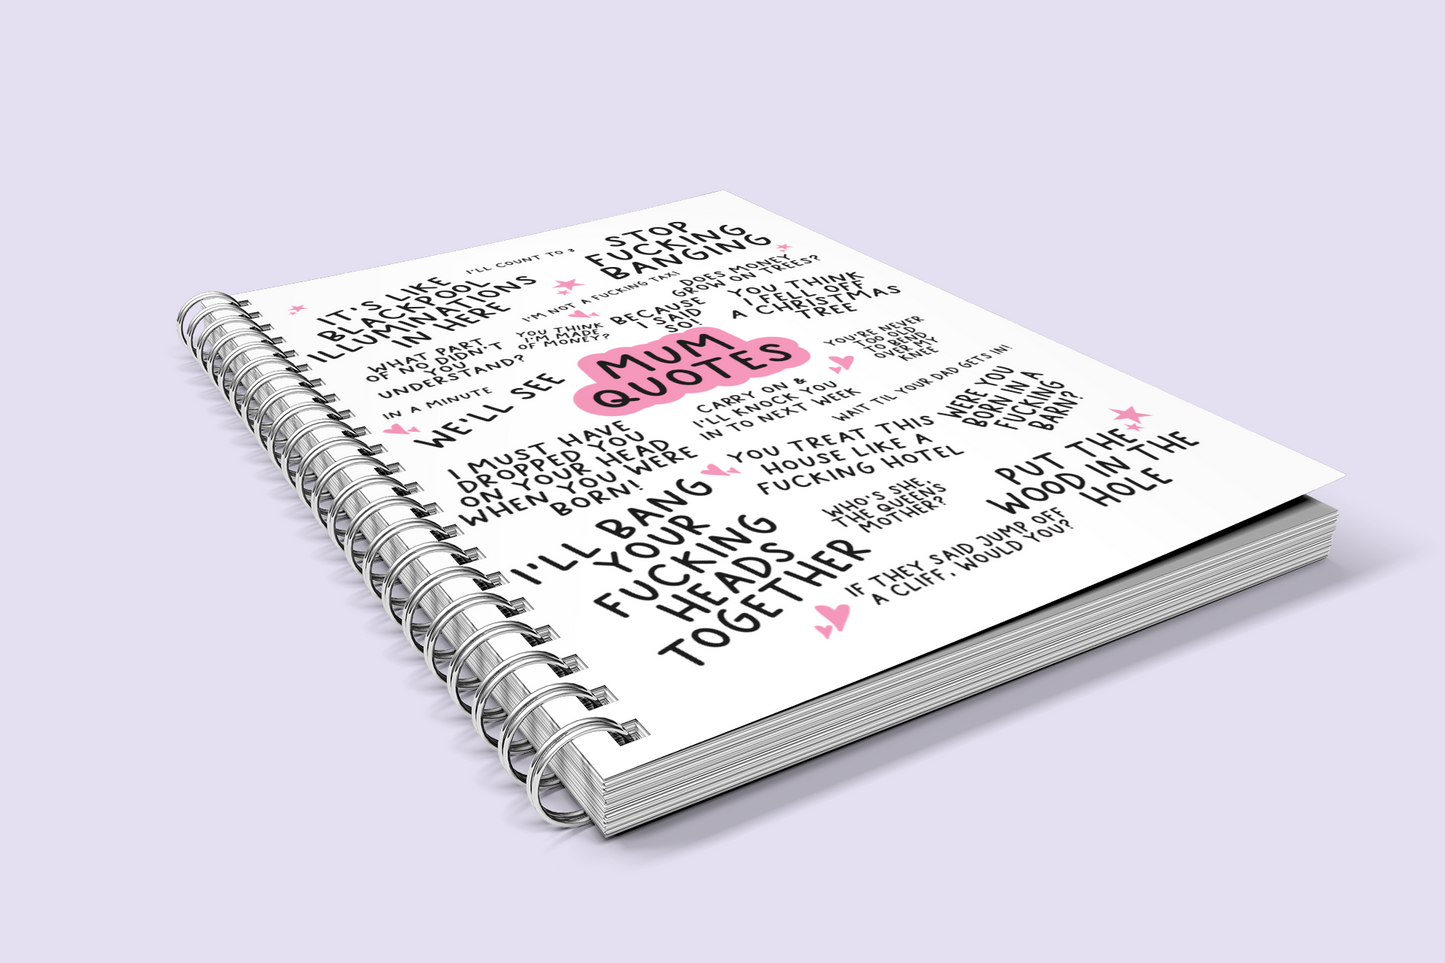 Notebook featuring famous mum quotes which include 'stop fucking banging, it's like blackpool illuminations in here & i'll bang your fucking heads together'.